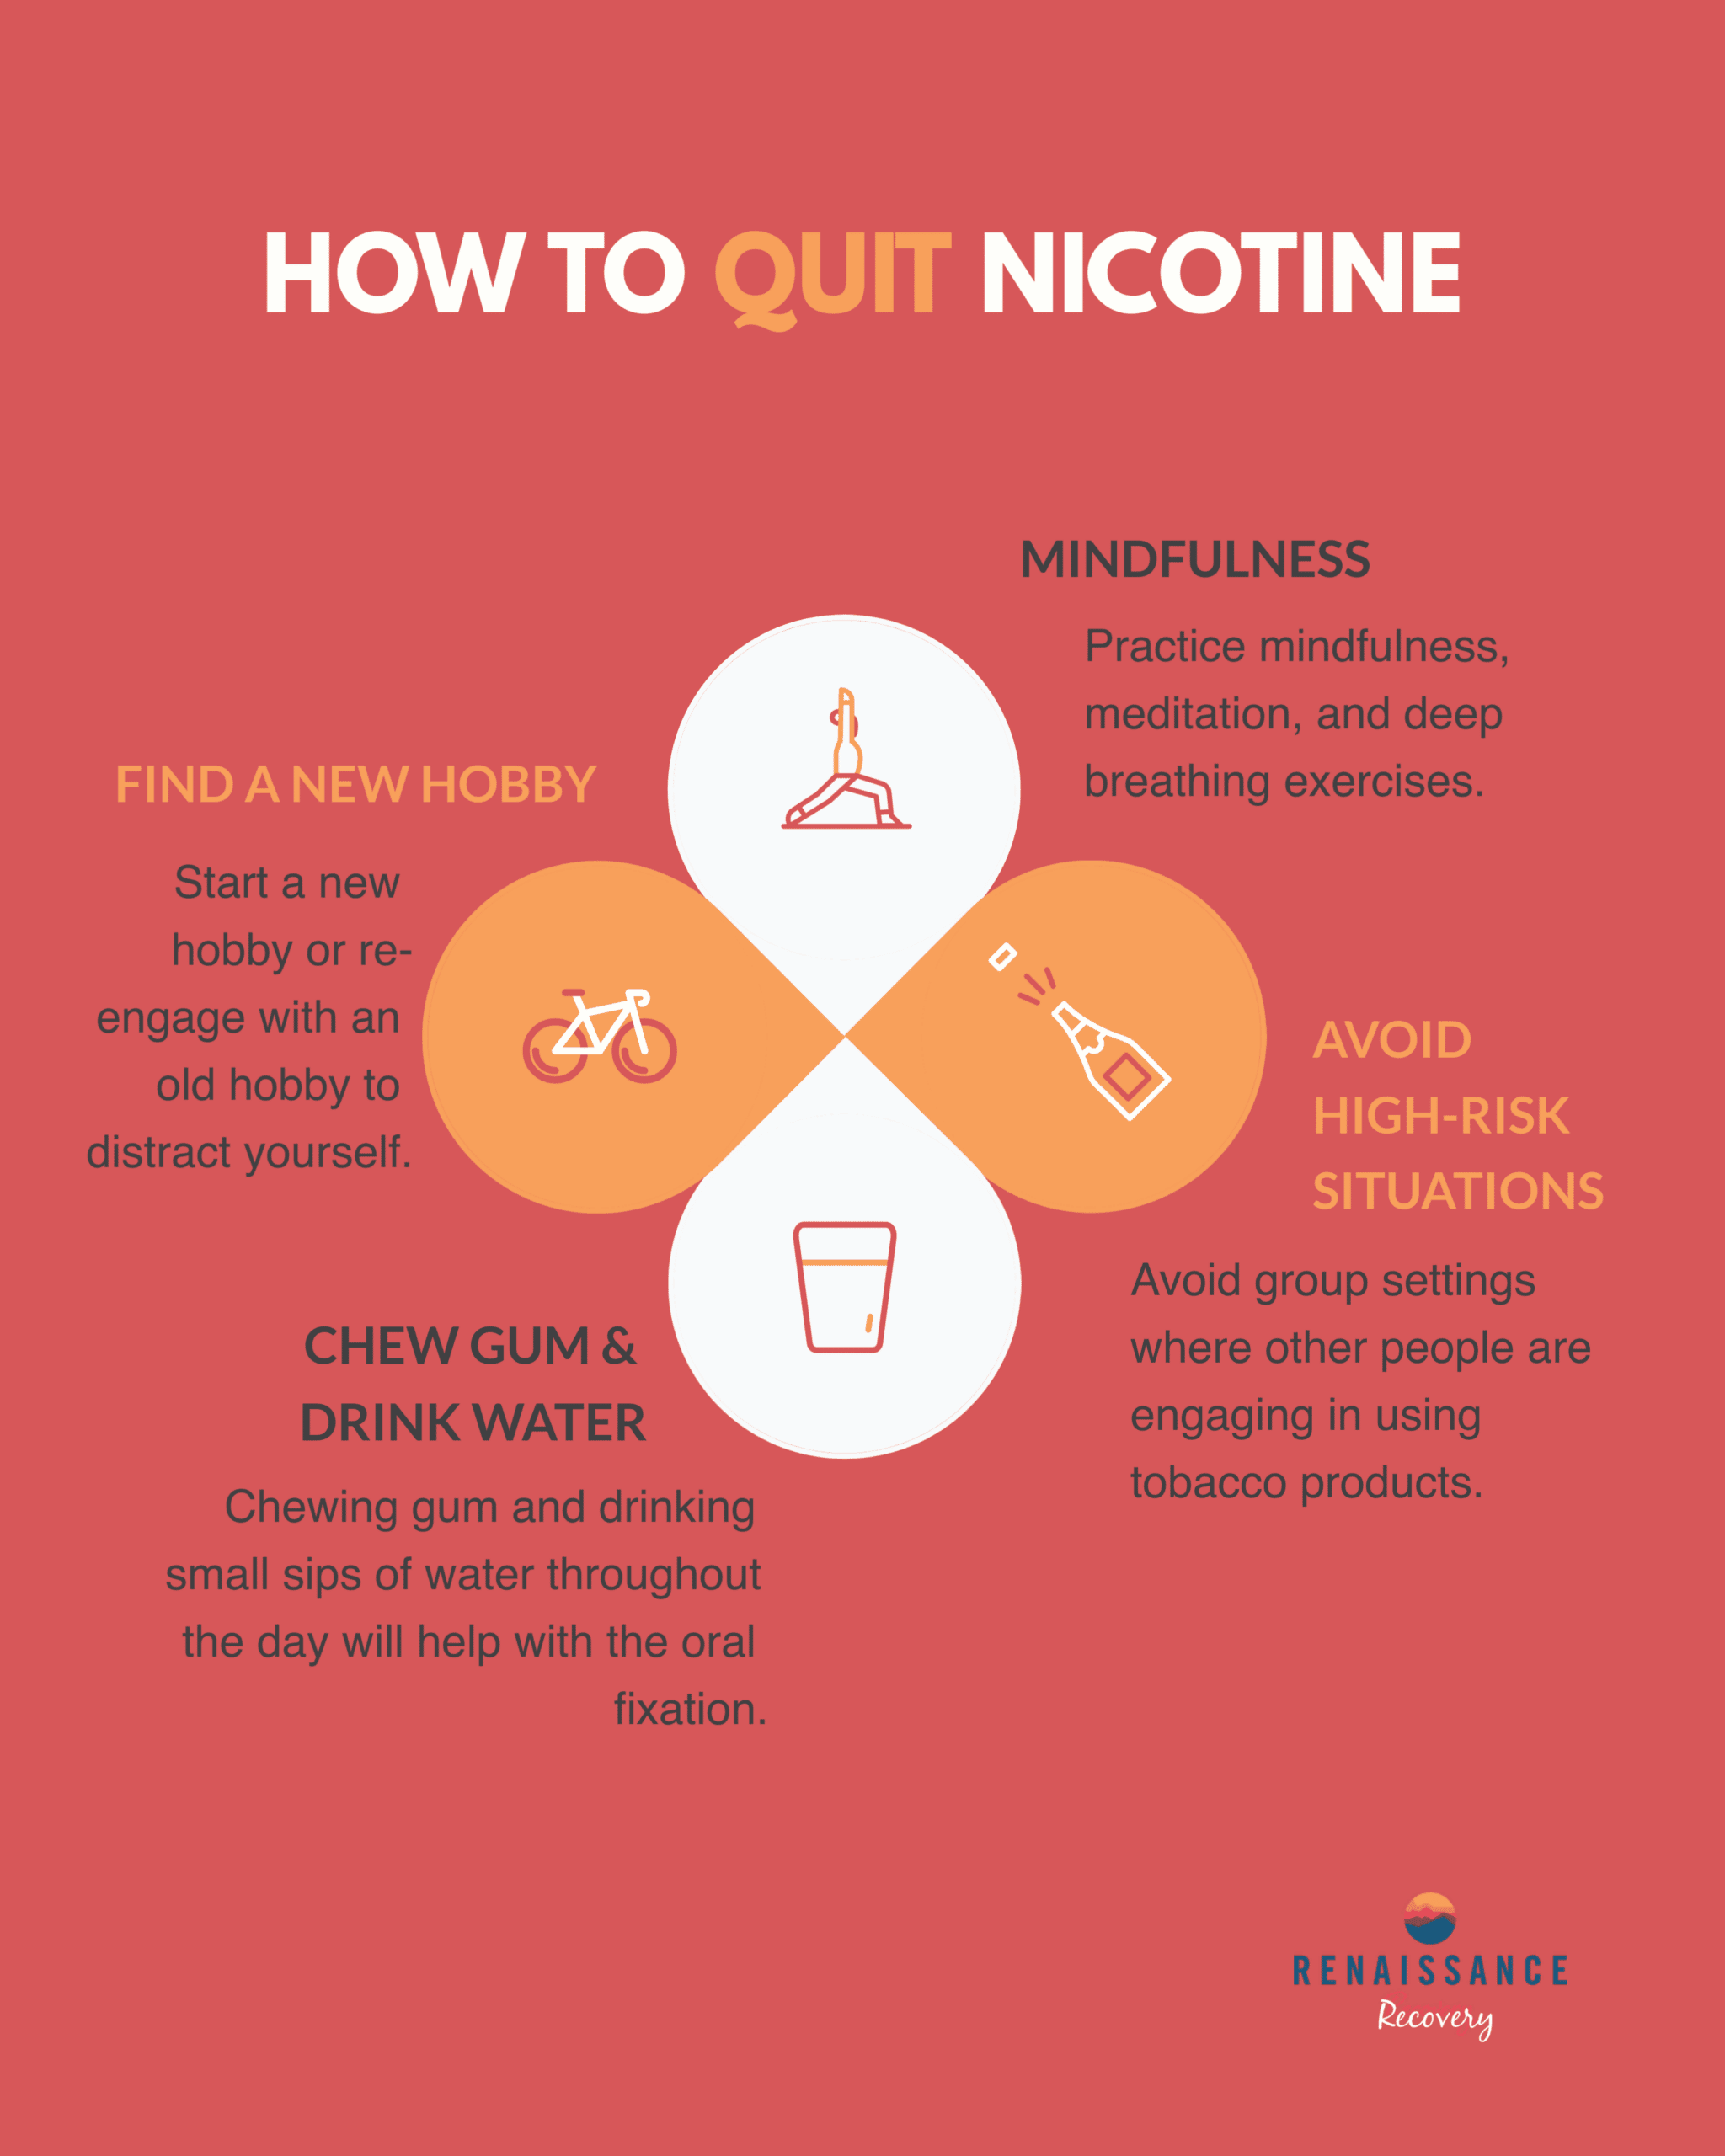 An infographic on How to quit nicotine